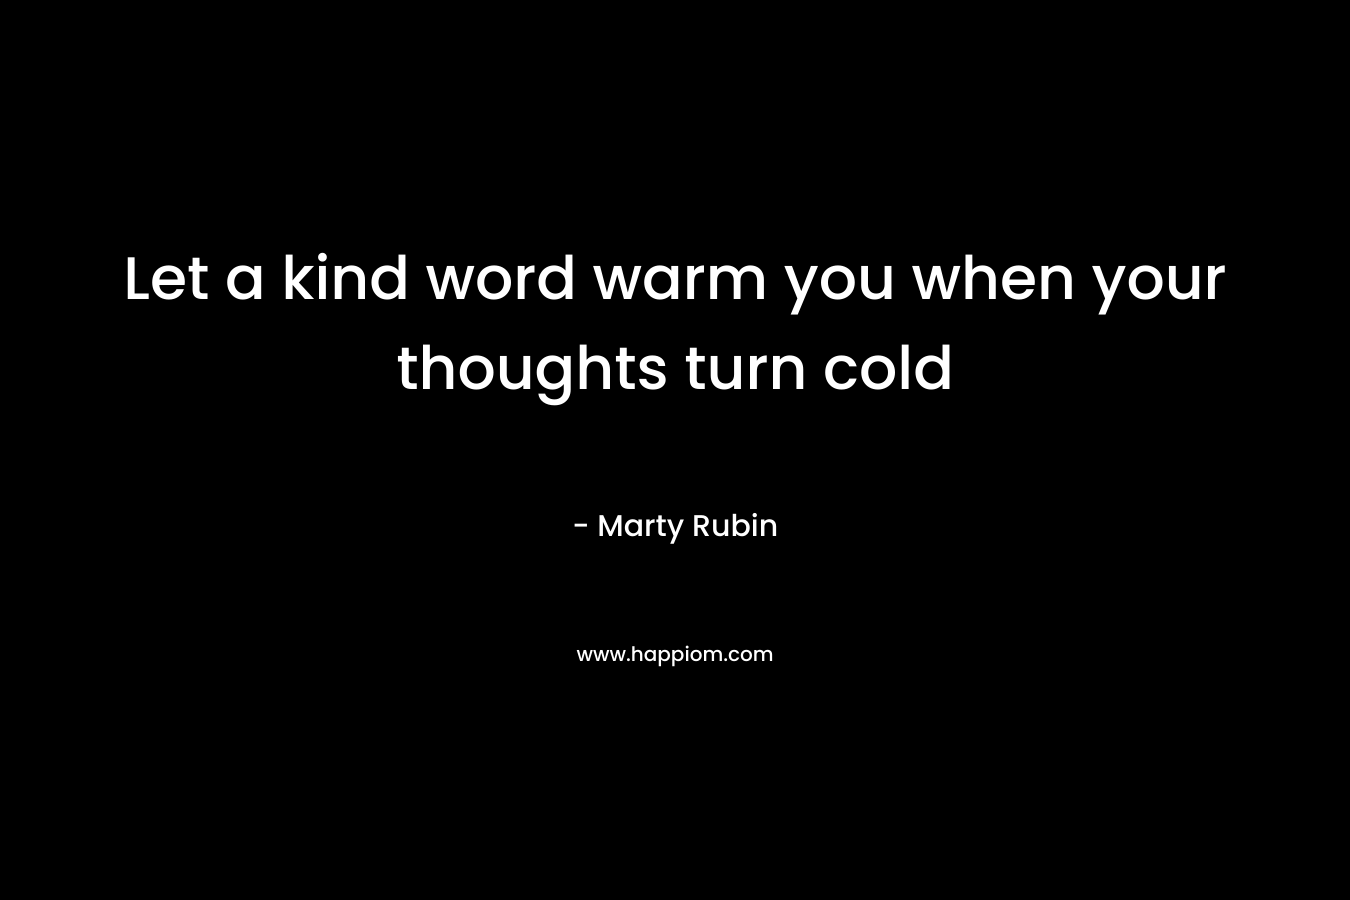 Let a kind word warm you when your thoughts turn cold